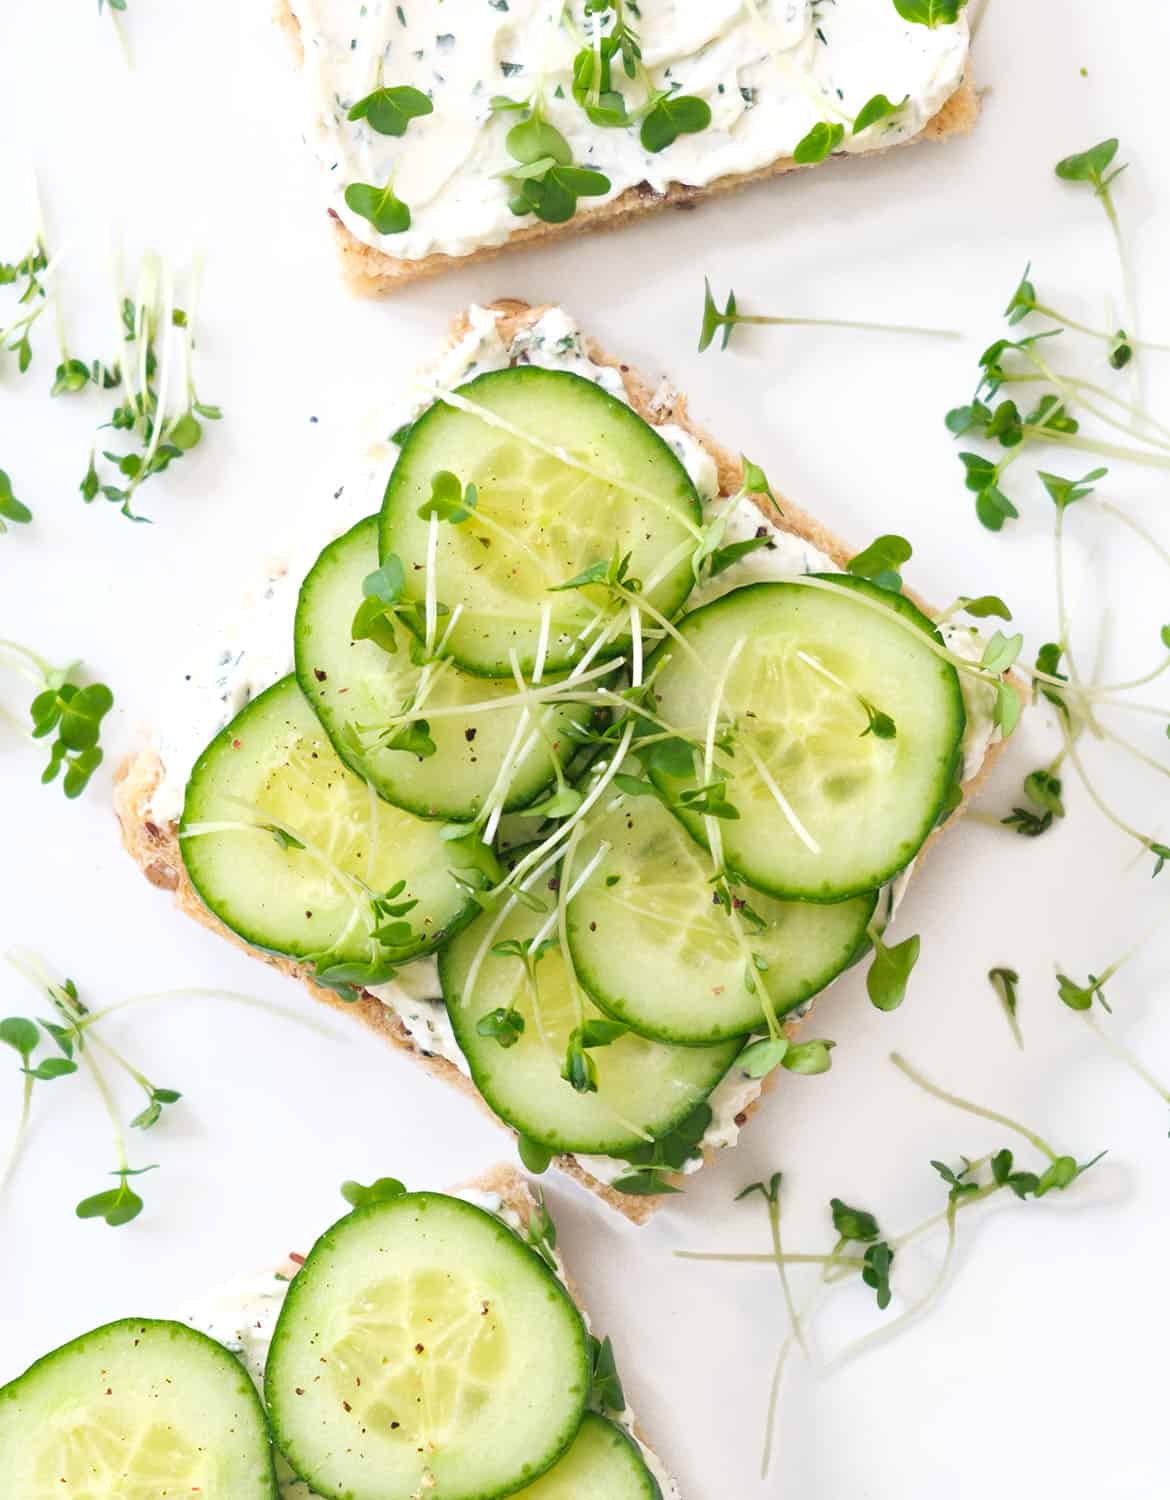 Top view of a few squared cream cheese sandwiches topped with sliced cucumber and English cress.